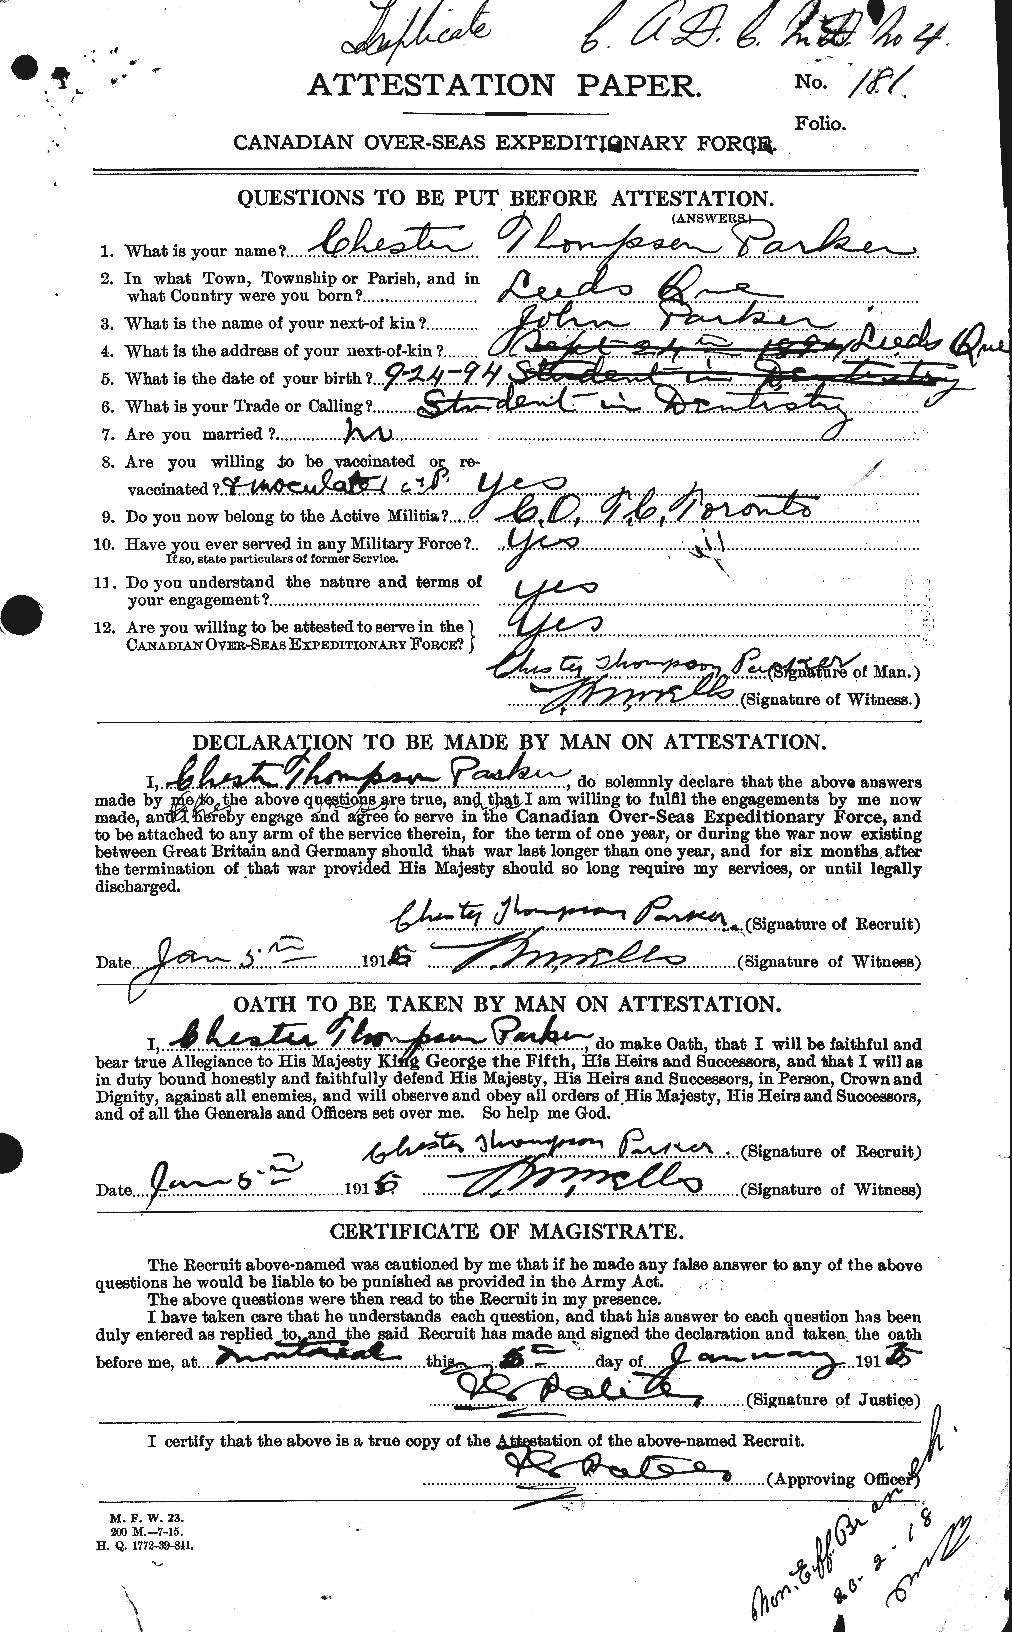 Personnel Records of the First World War - CEF 565077a